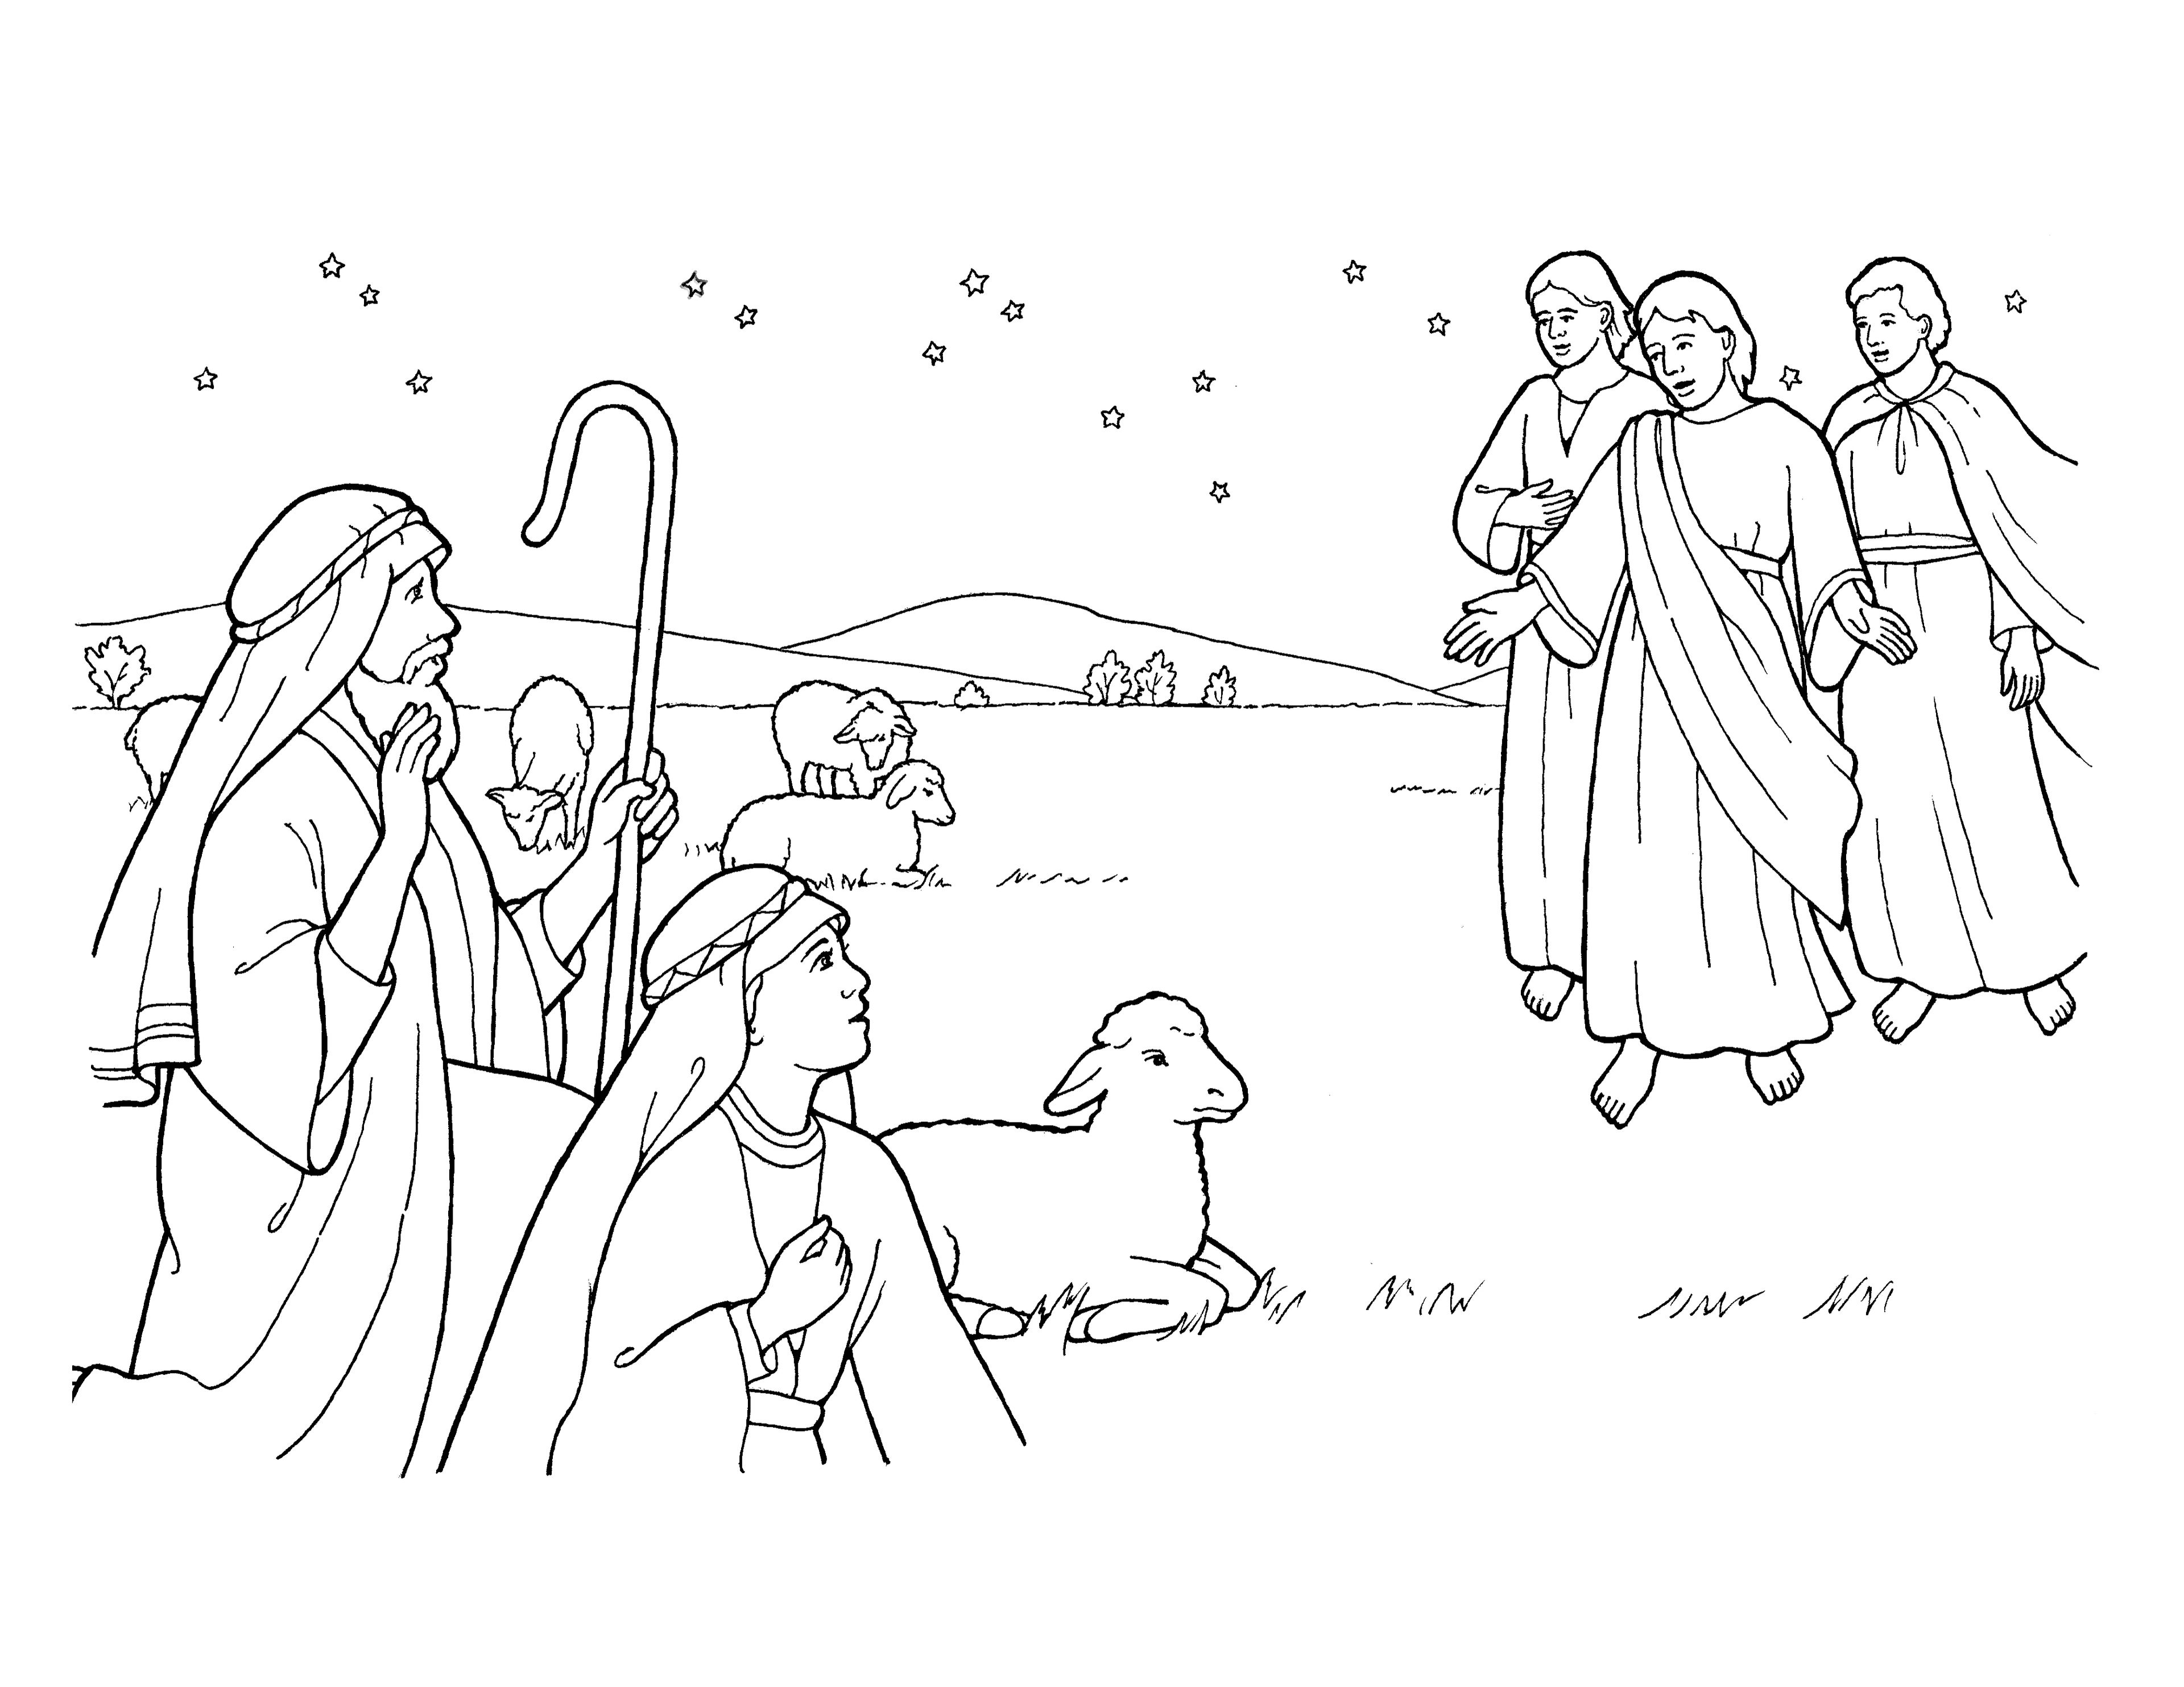 An illustration of the angels appearing to the Shepherds.